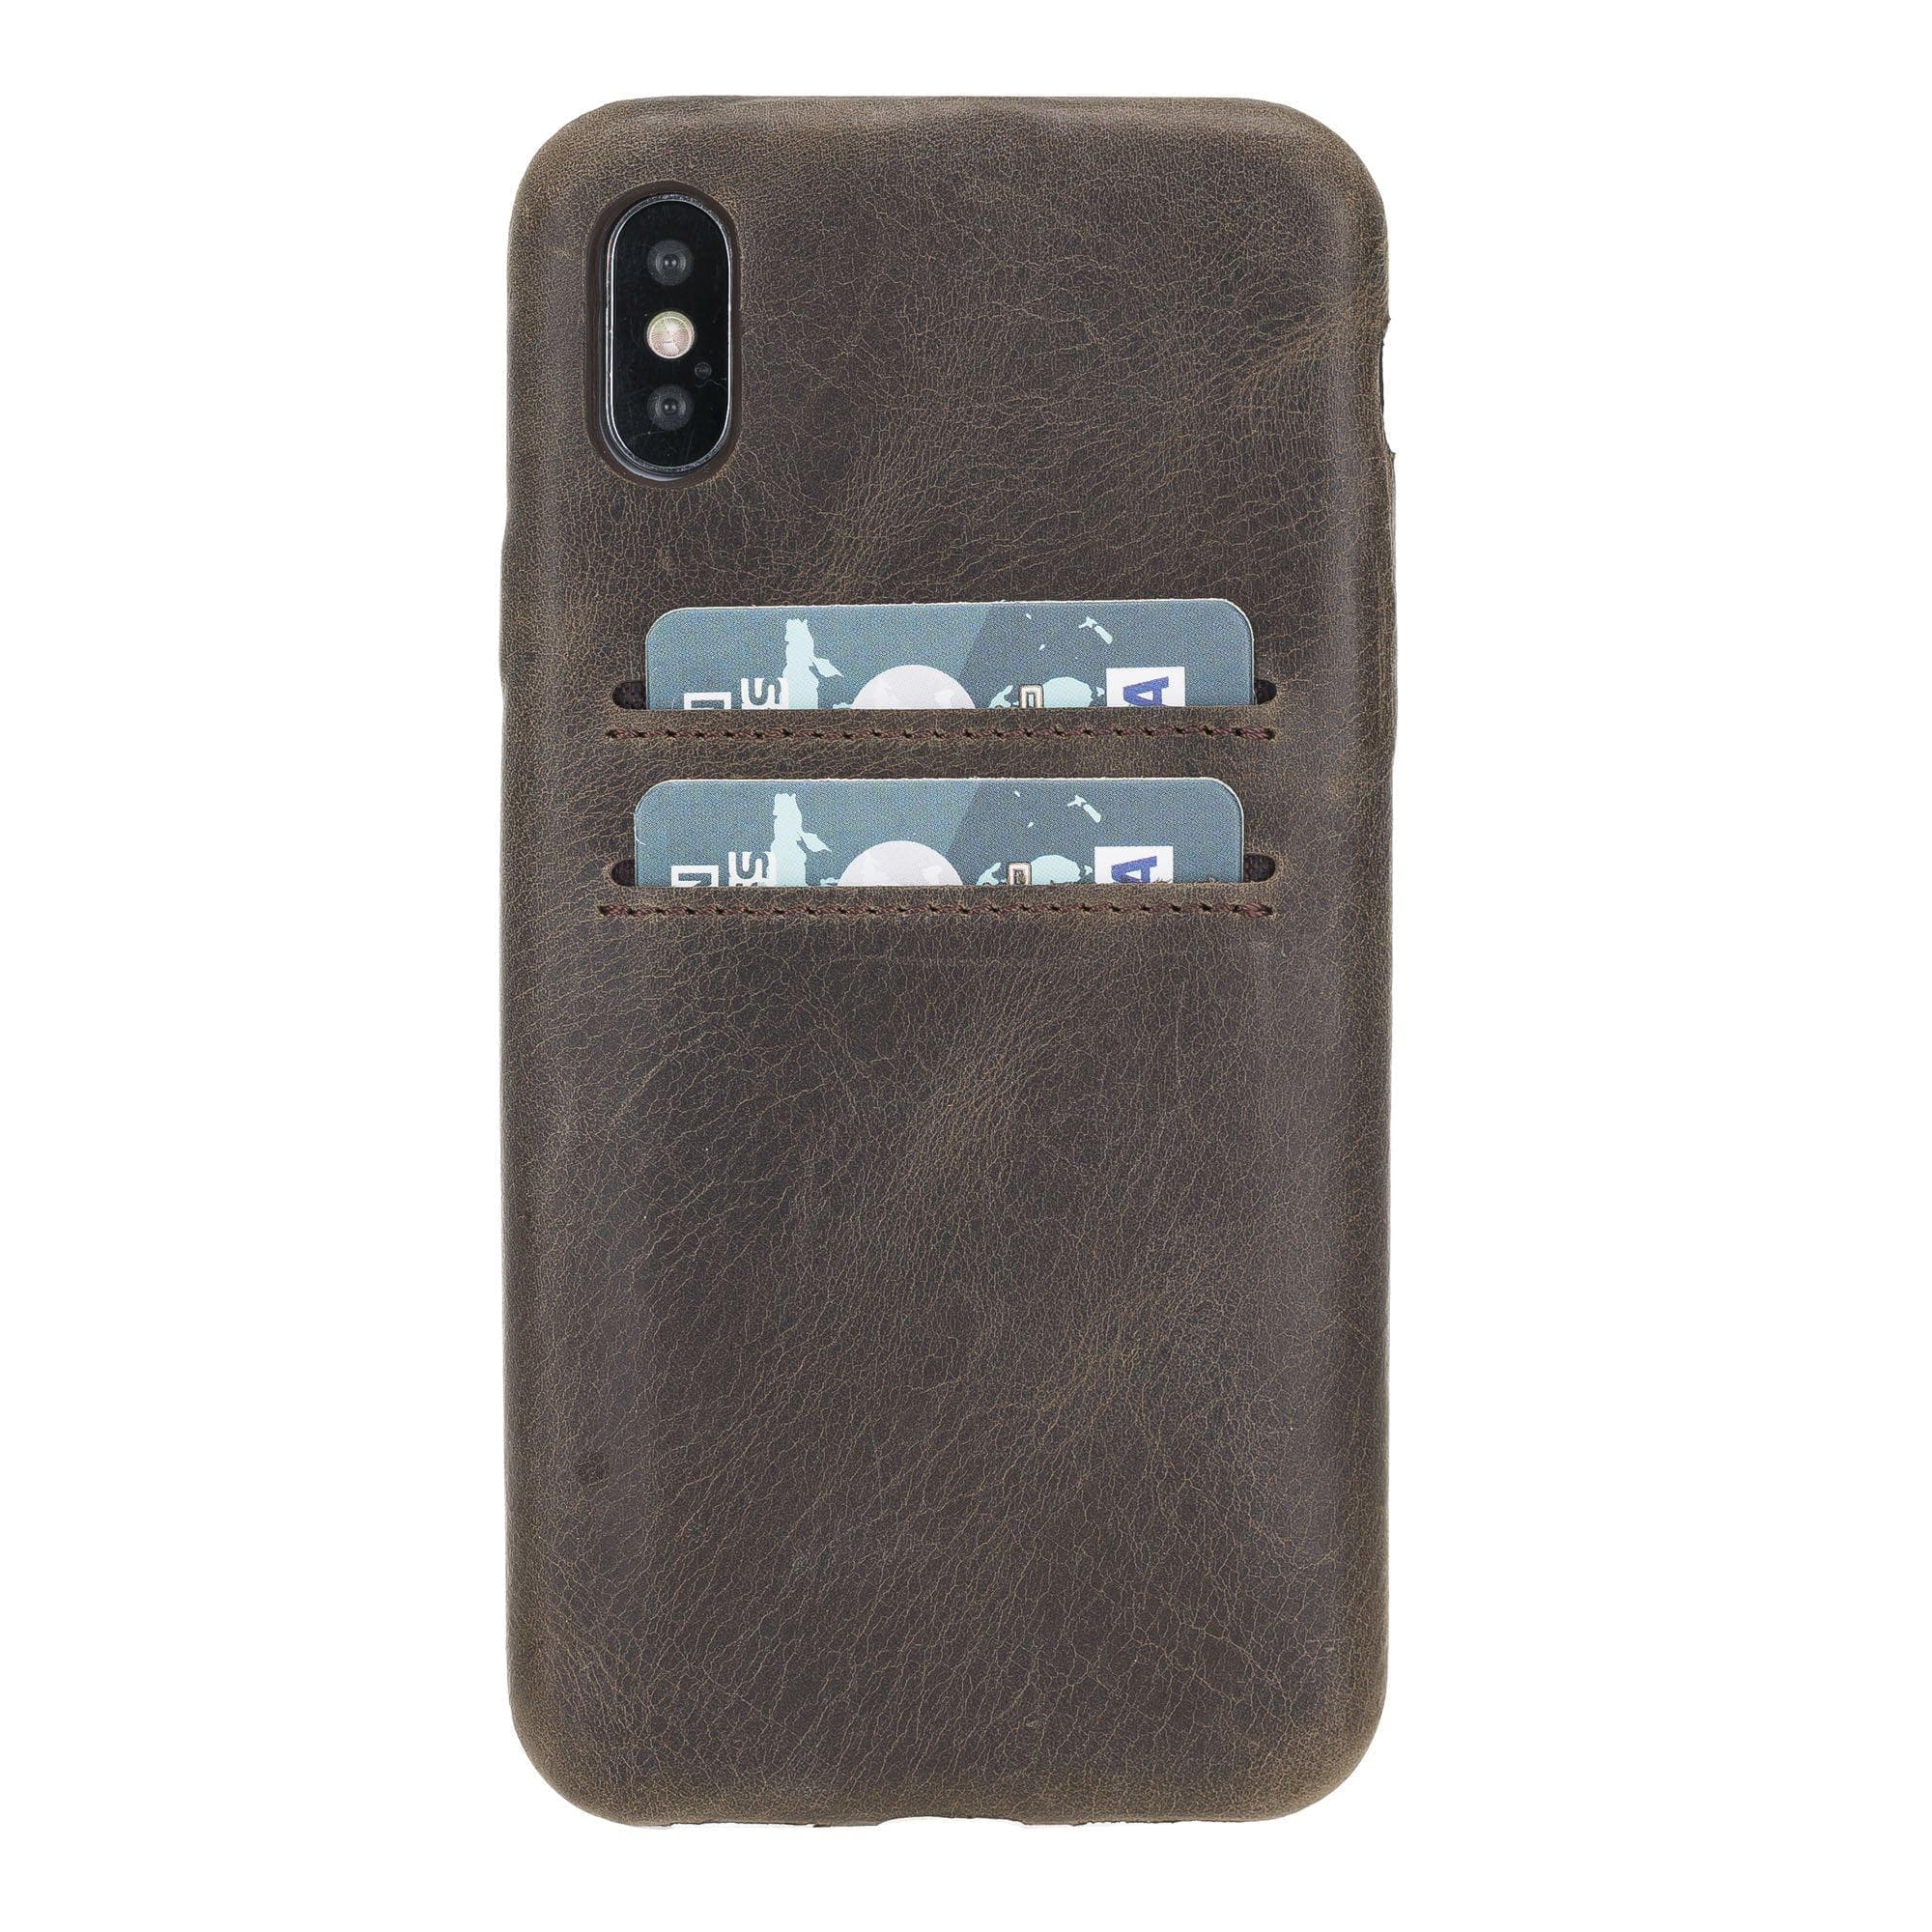 B2B - Apple iPhone X/XS Leather Case / UCCC - Ultra Cover with Card Holder RO6 Bouletta B2B